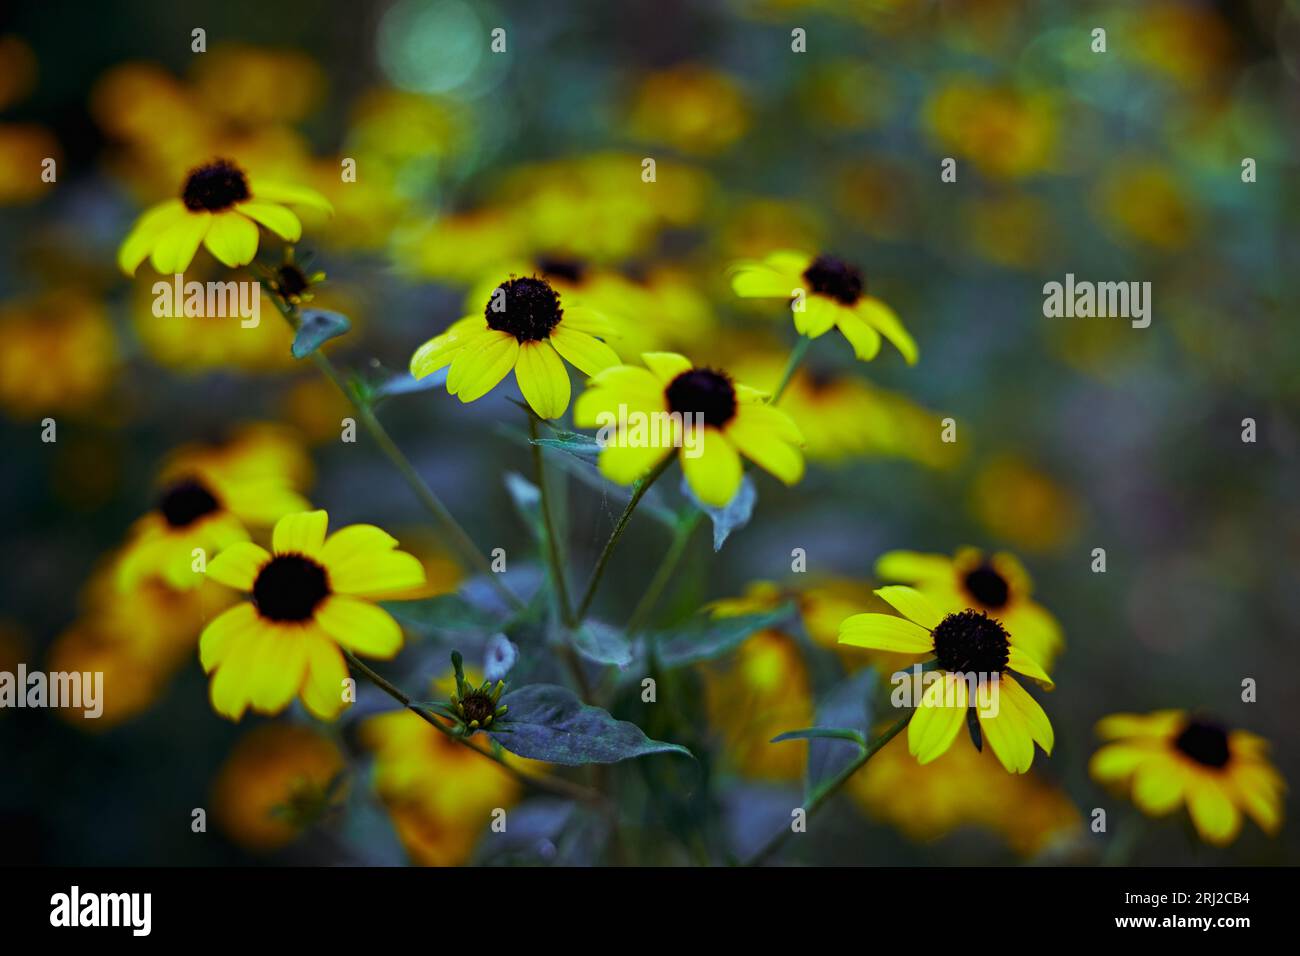 Romantic flowers Rudbeckia triloba with blurred background. Brown eyed Susan flowers. Stock Photo